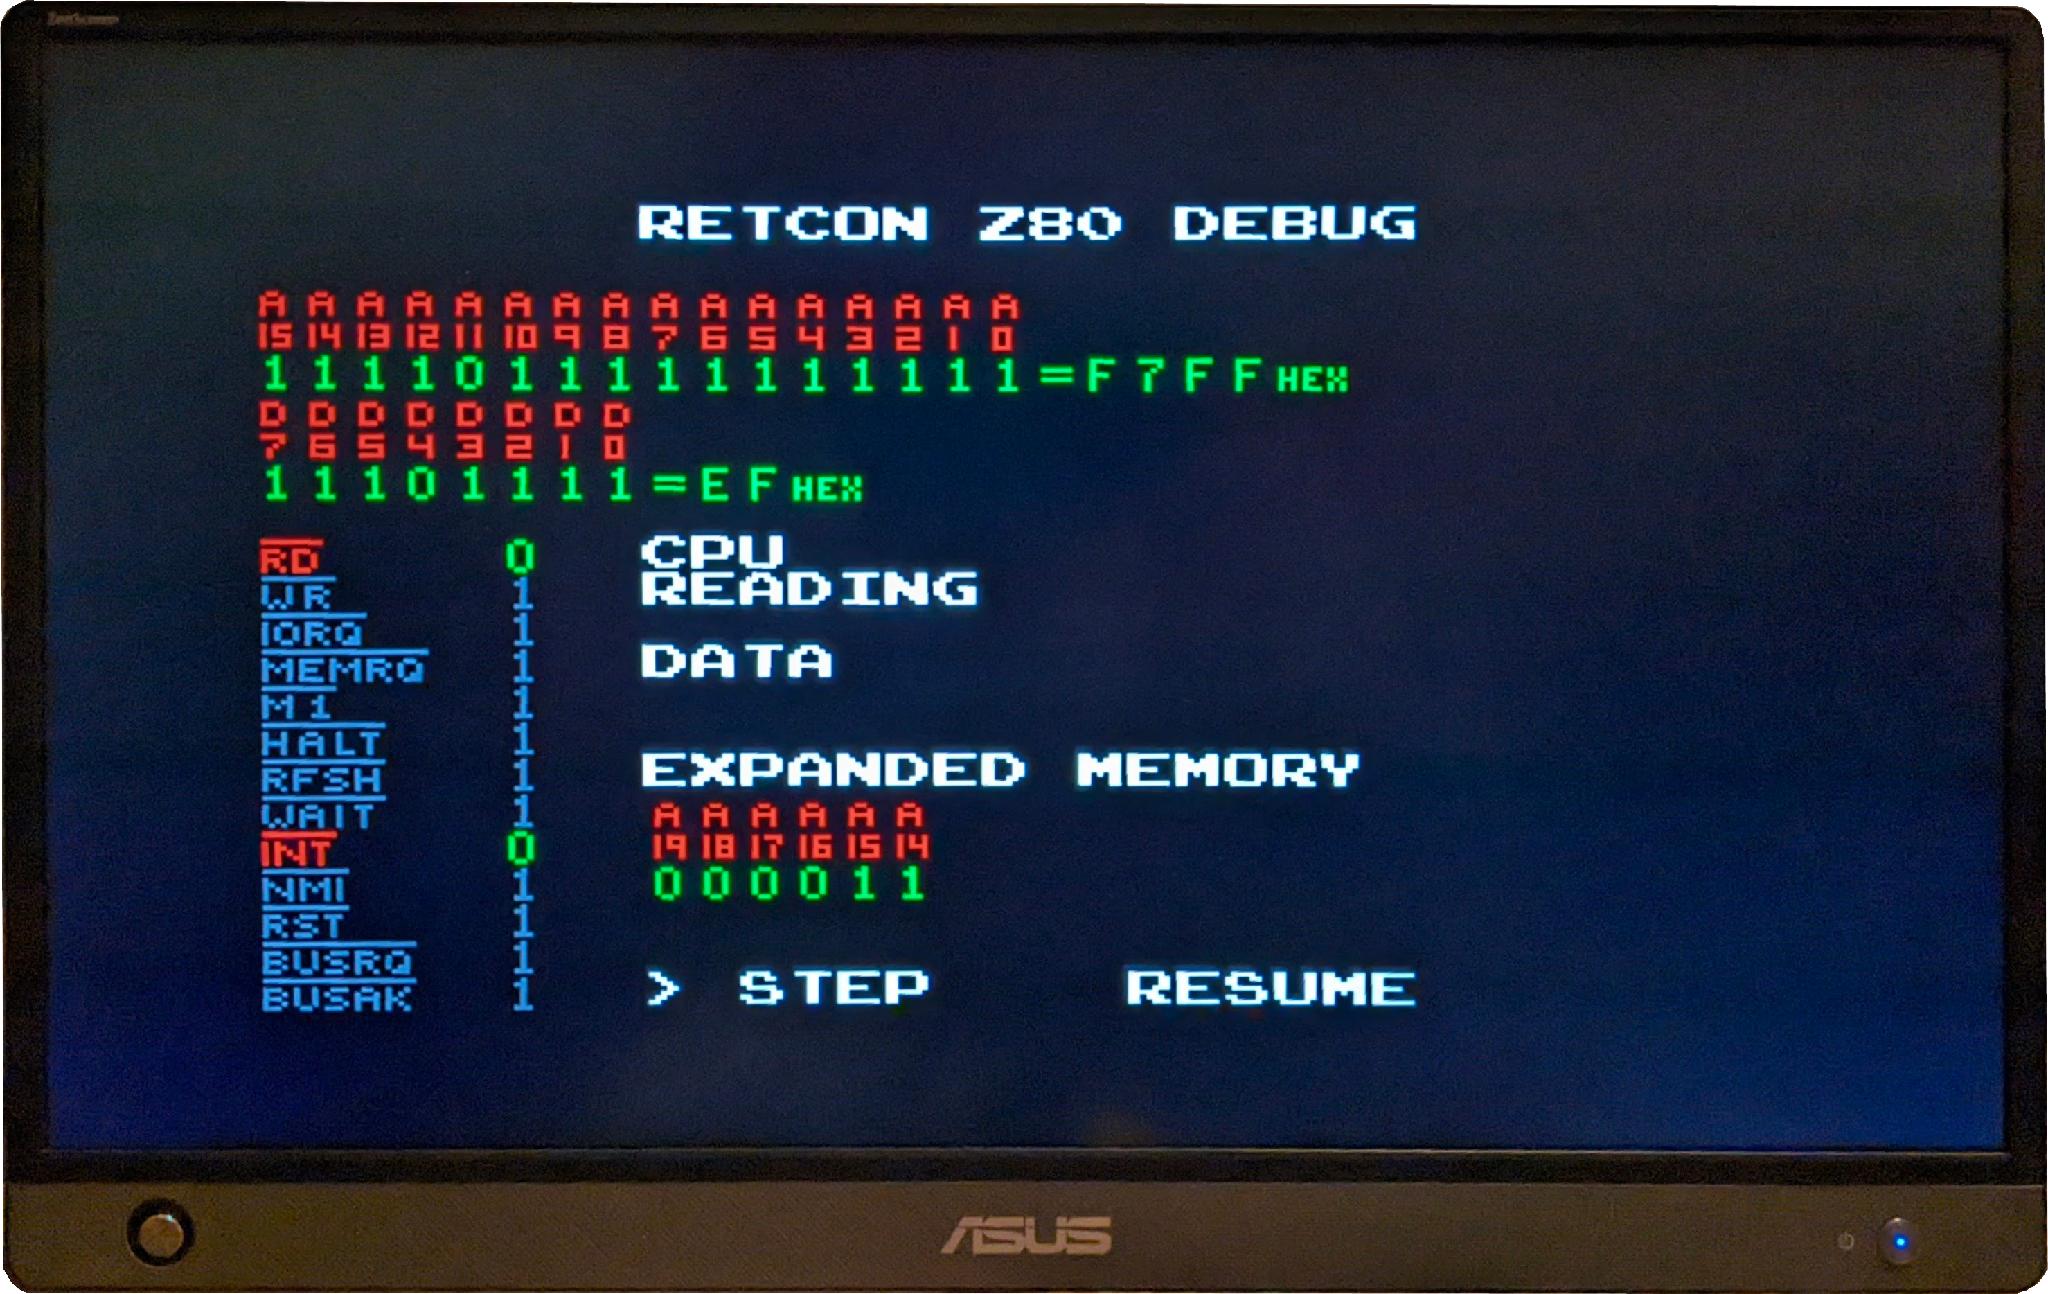 A photo of the Retcon Z80 debug screen running on an Asus portable monitor